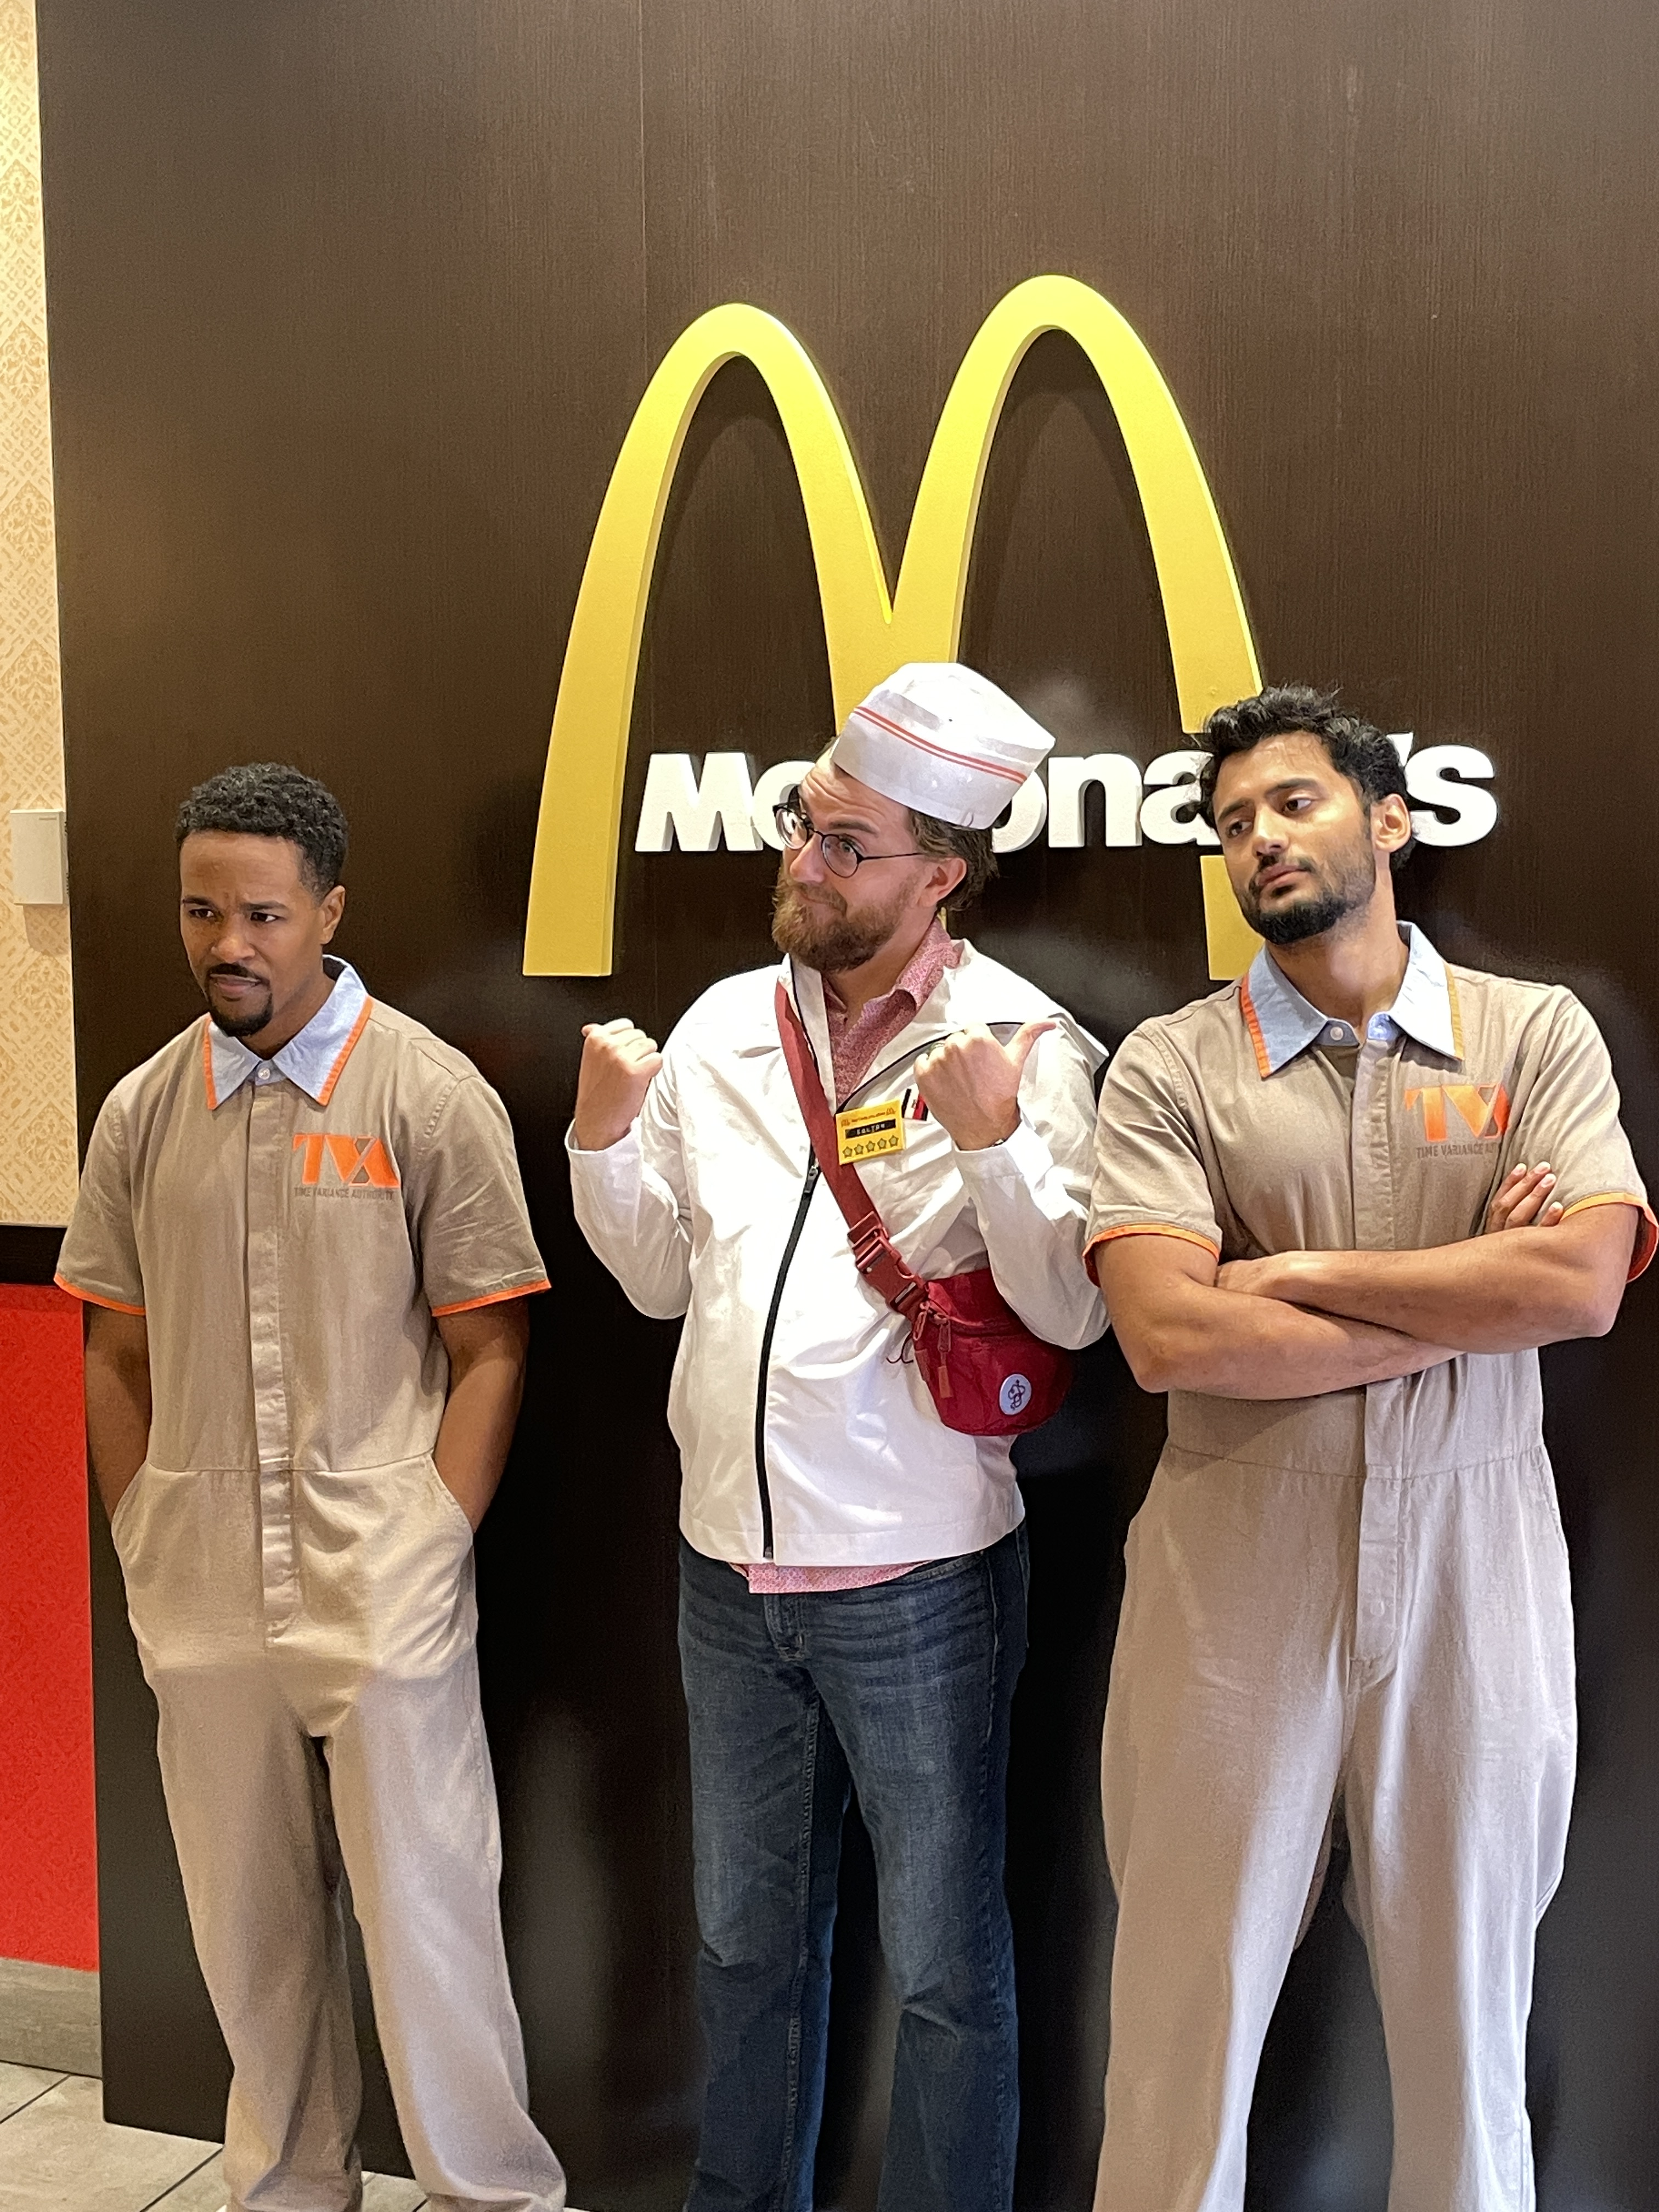 Group picture including 2 TVA Prisoners in front of a mcdonald's logo